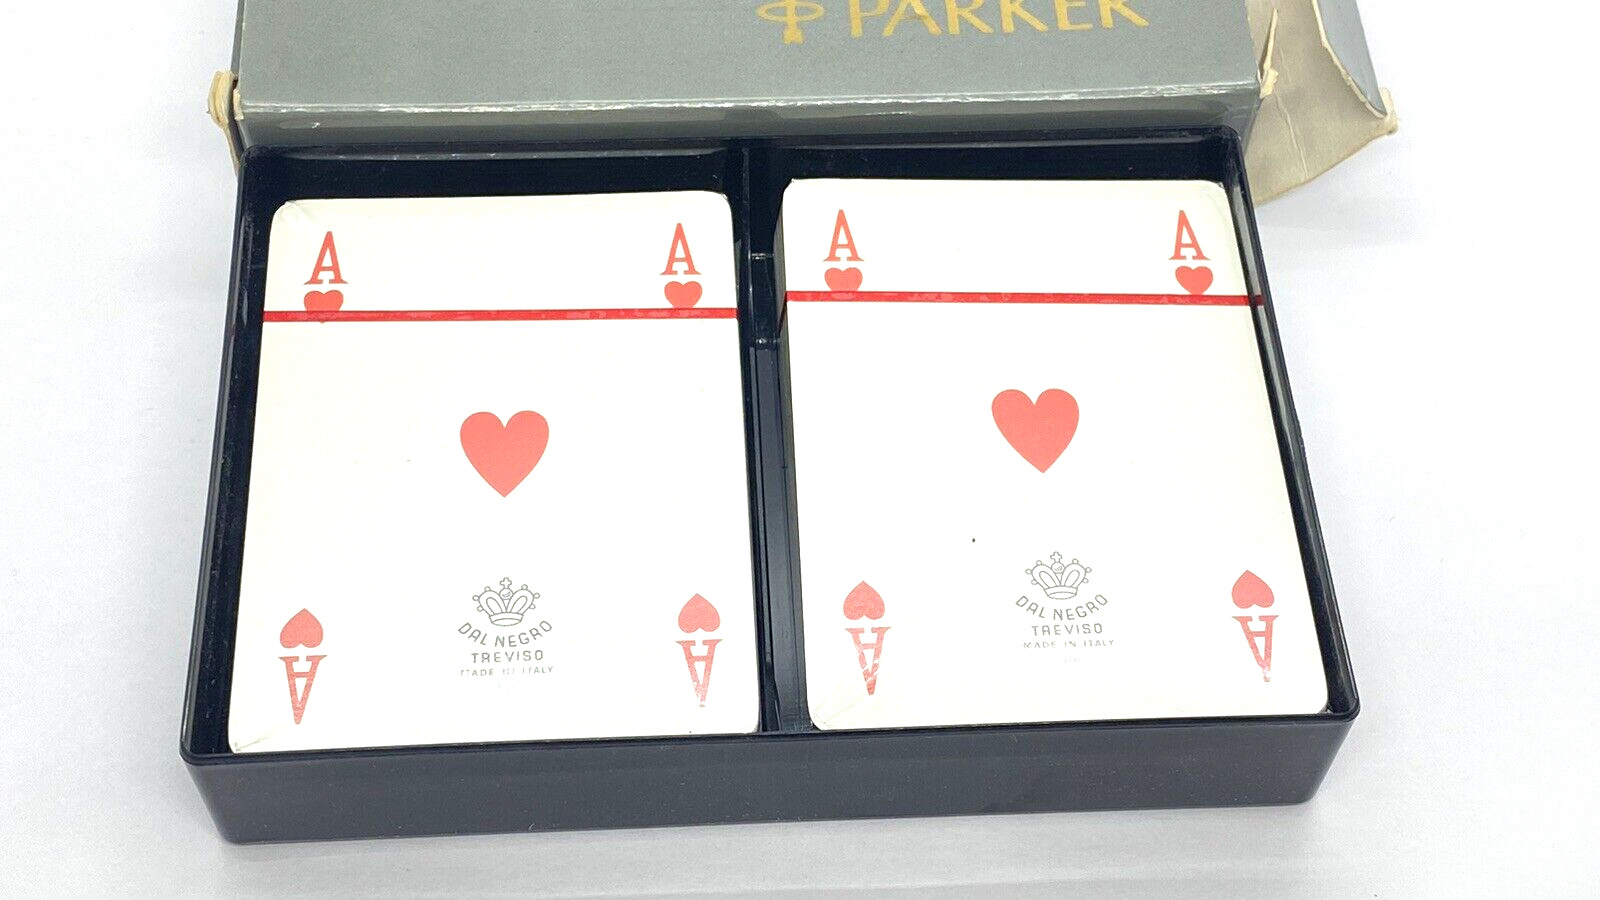 GORGEOUS VINTAGE NOS PARKER PEN, PLAYING CARDS, MADE IN ITALY BY DAL NEGRO, JM